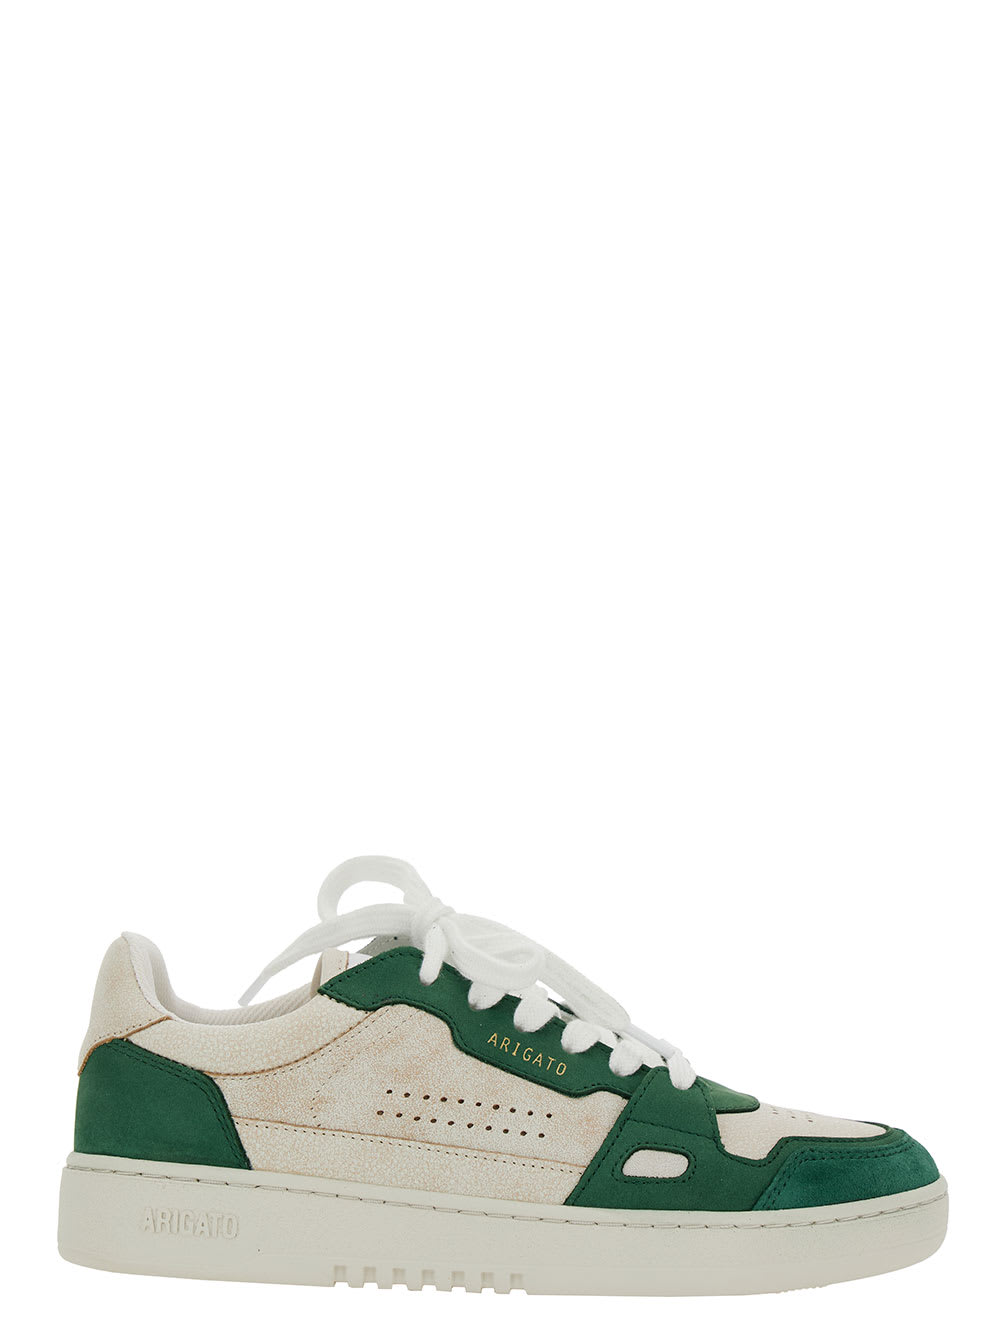 Axel Arigato Dice Low Green And White Low Top Trainers With Embossed Logo And Vintage Effect In Leather Woman